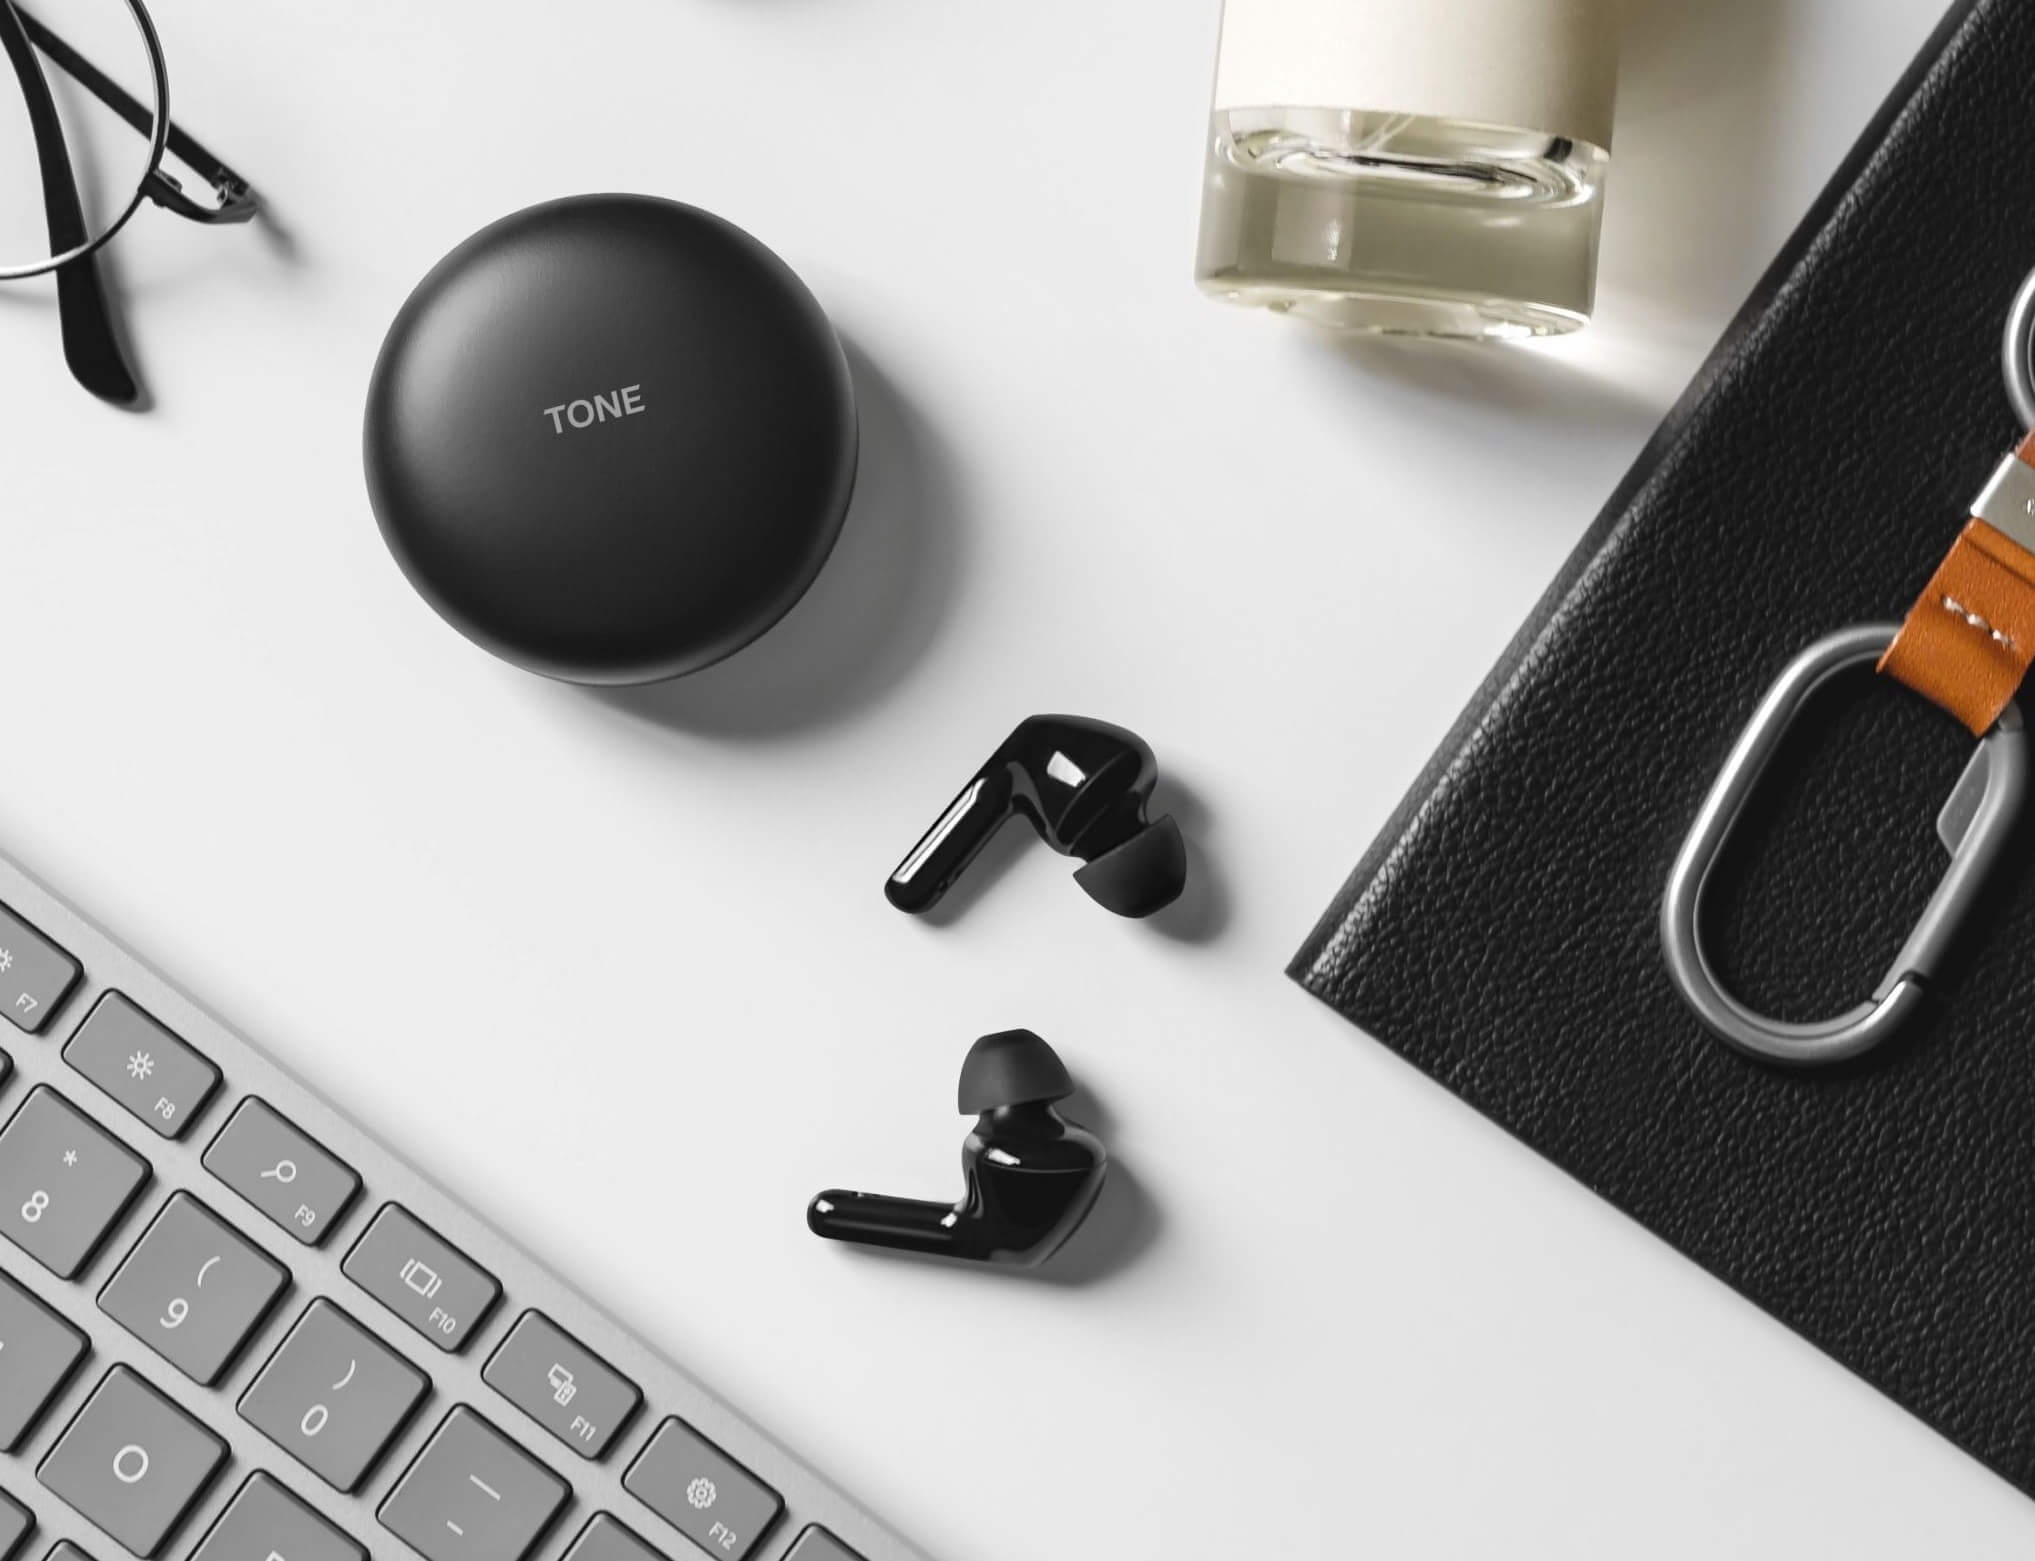 LG's new self-cleaning earbuds are now available to buy in the US